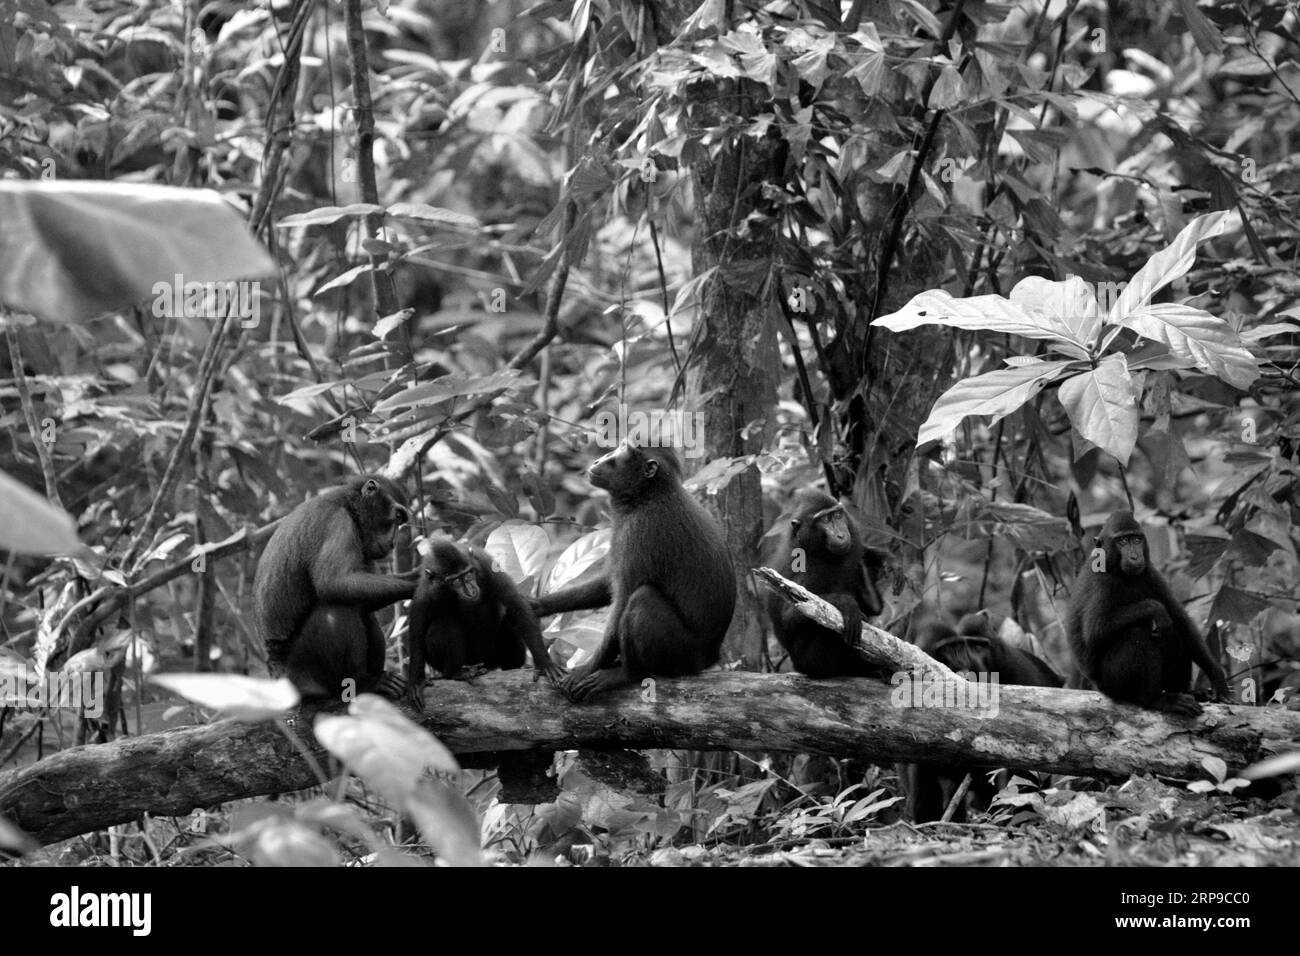 Sulawesi black-crested macaques (Macaca nigra) are grooming during social activity in Tangkoko forest, North Sulawesi, Indonesia. Climate change and disease are emerging threats to primates, while crested macaque belongs to the 10% of primate species that are highly vulnerable to droughts. A recent report revealed that the temperature is indeed increasing in Tangkoko forest, and the overall fruit abundance decreased. 'In a warmer future, they (primates) would have to adjust, resting and staying in the shade during the hottest times of the day. This could mean foraging less or not mating,... Stock Photo